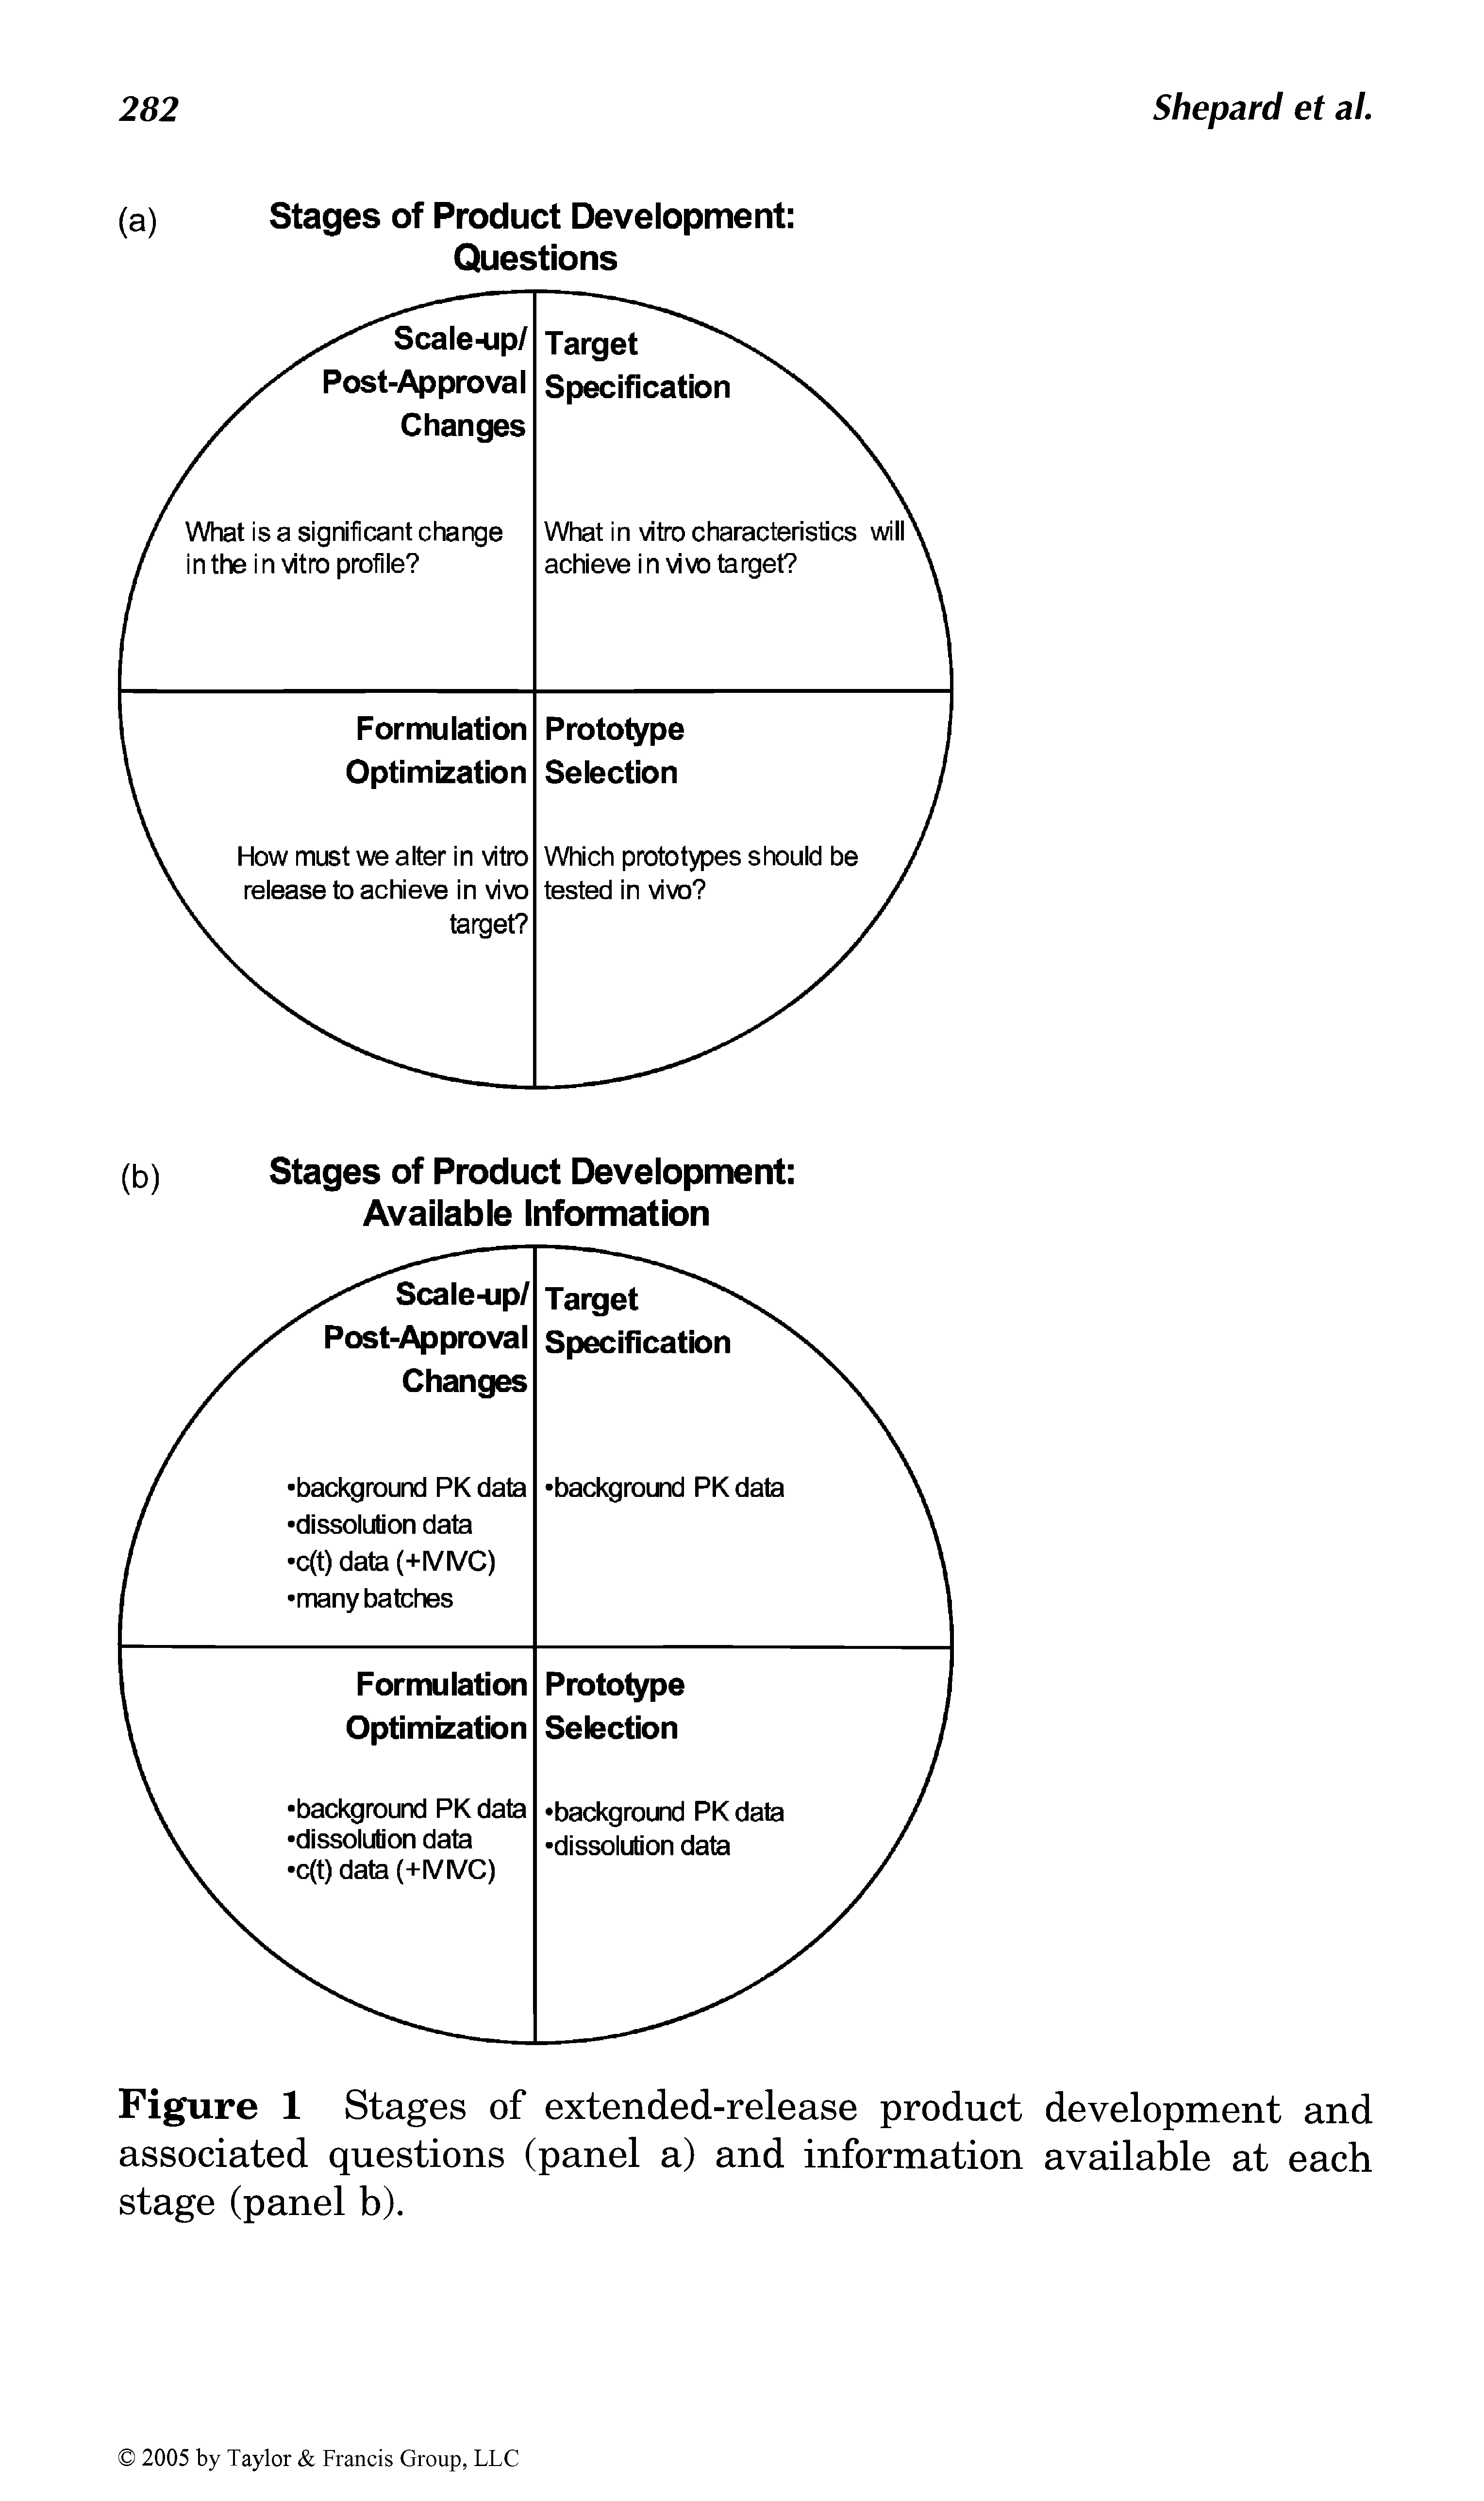 Figure 1 Stages of extended-release product development and associated questions (panel a) and information available at each stage (panel b).